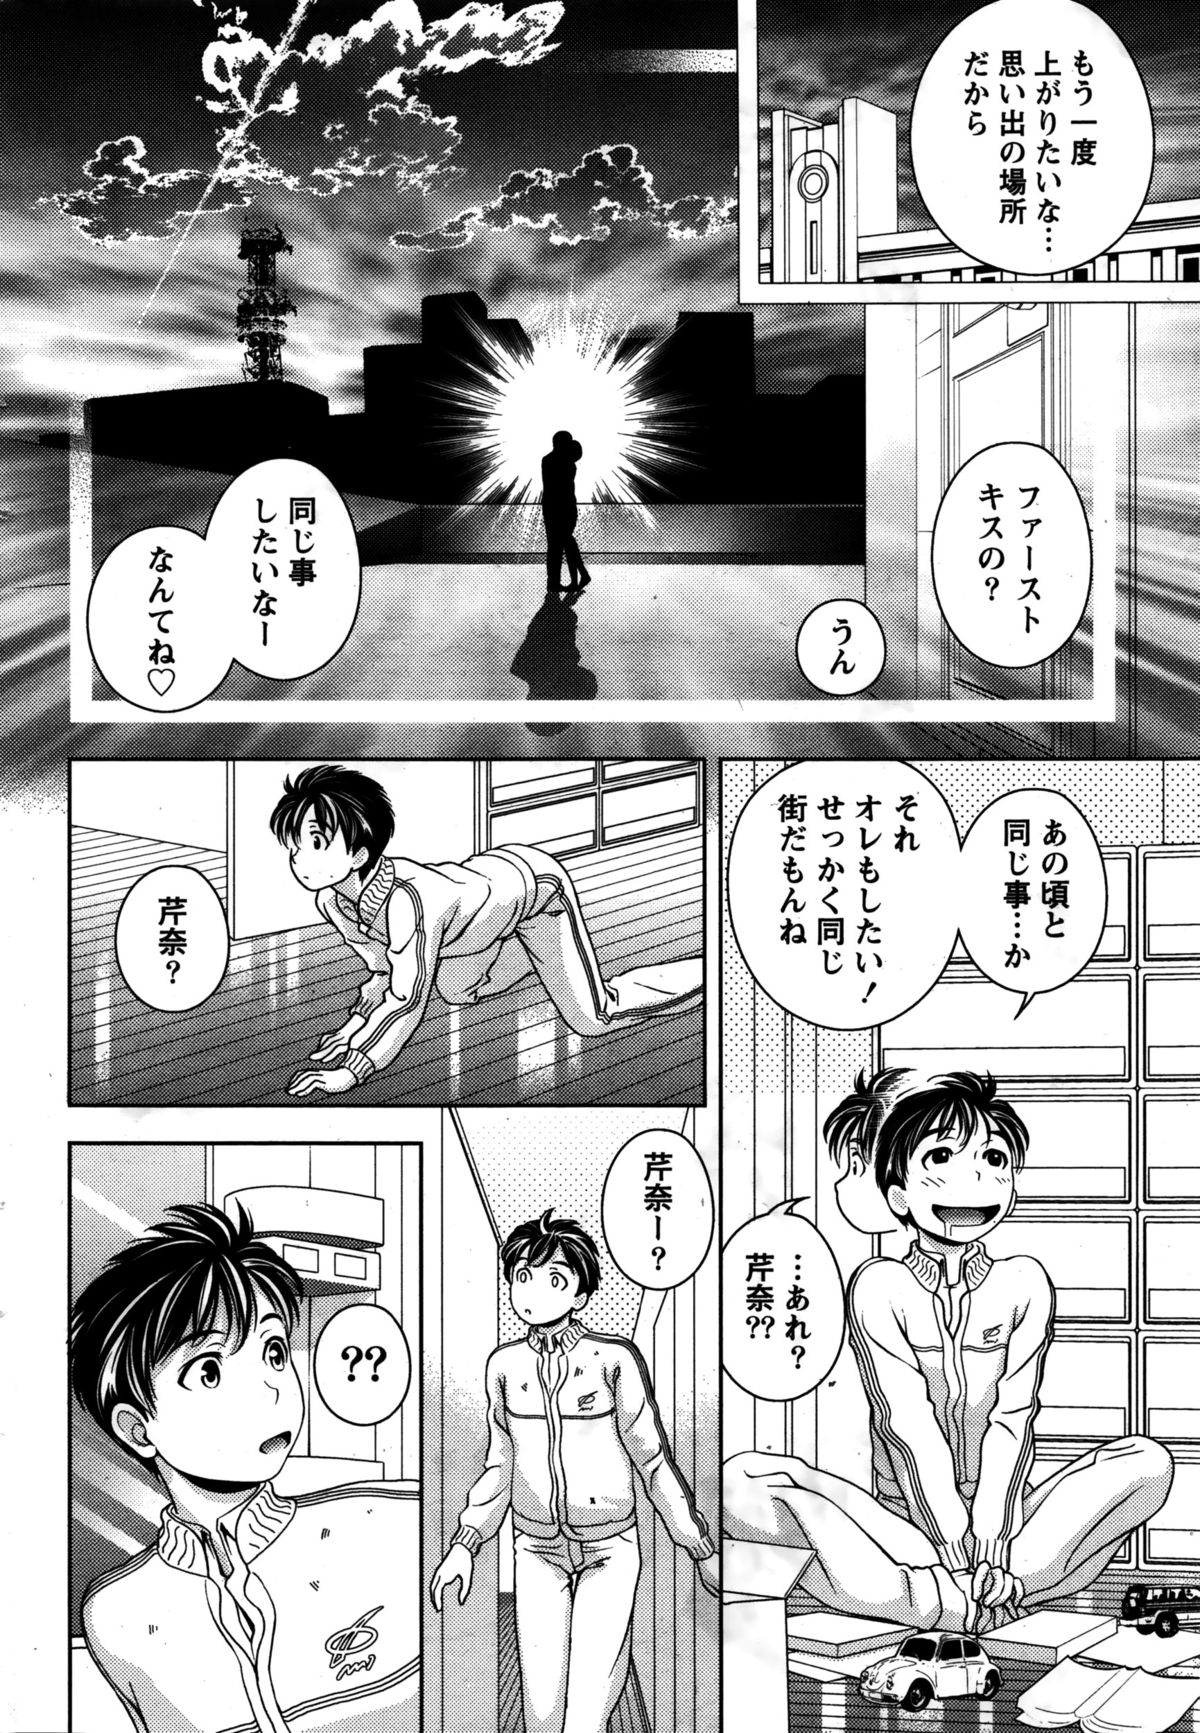 Monthly Vitaman 2016-02 page 35 full